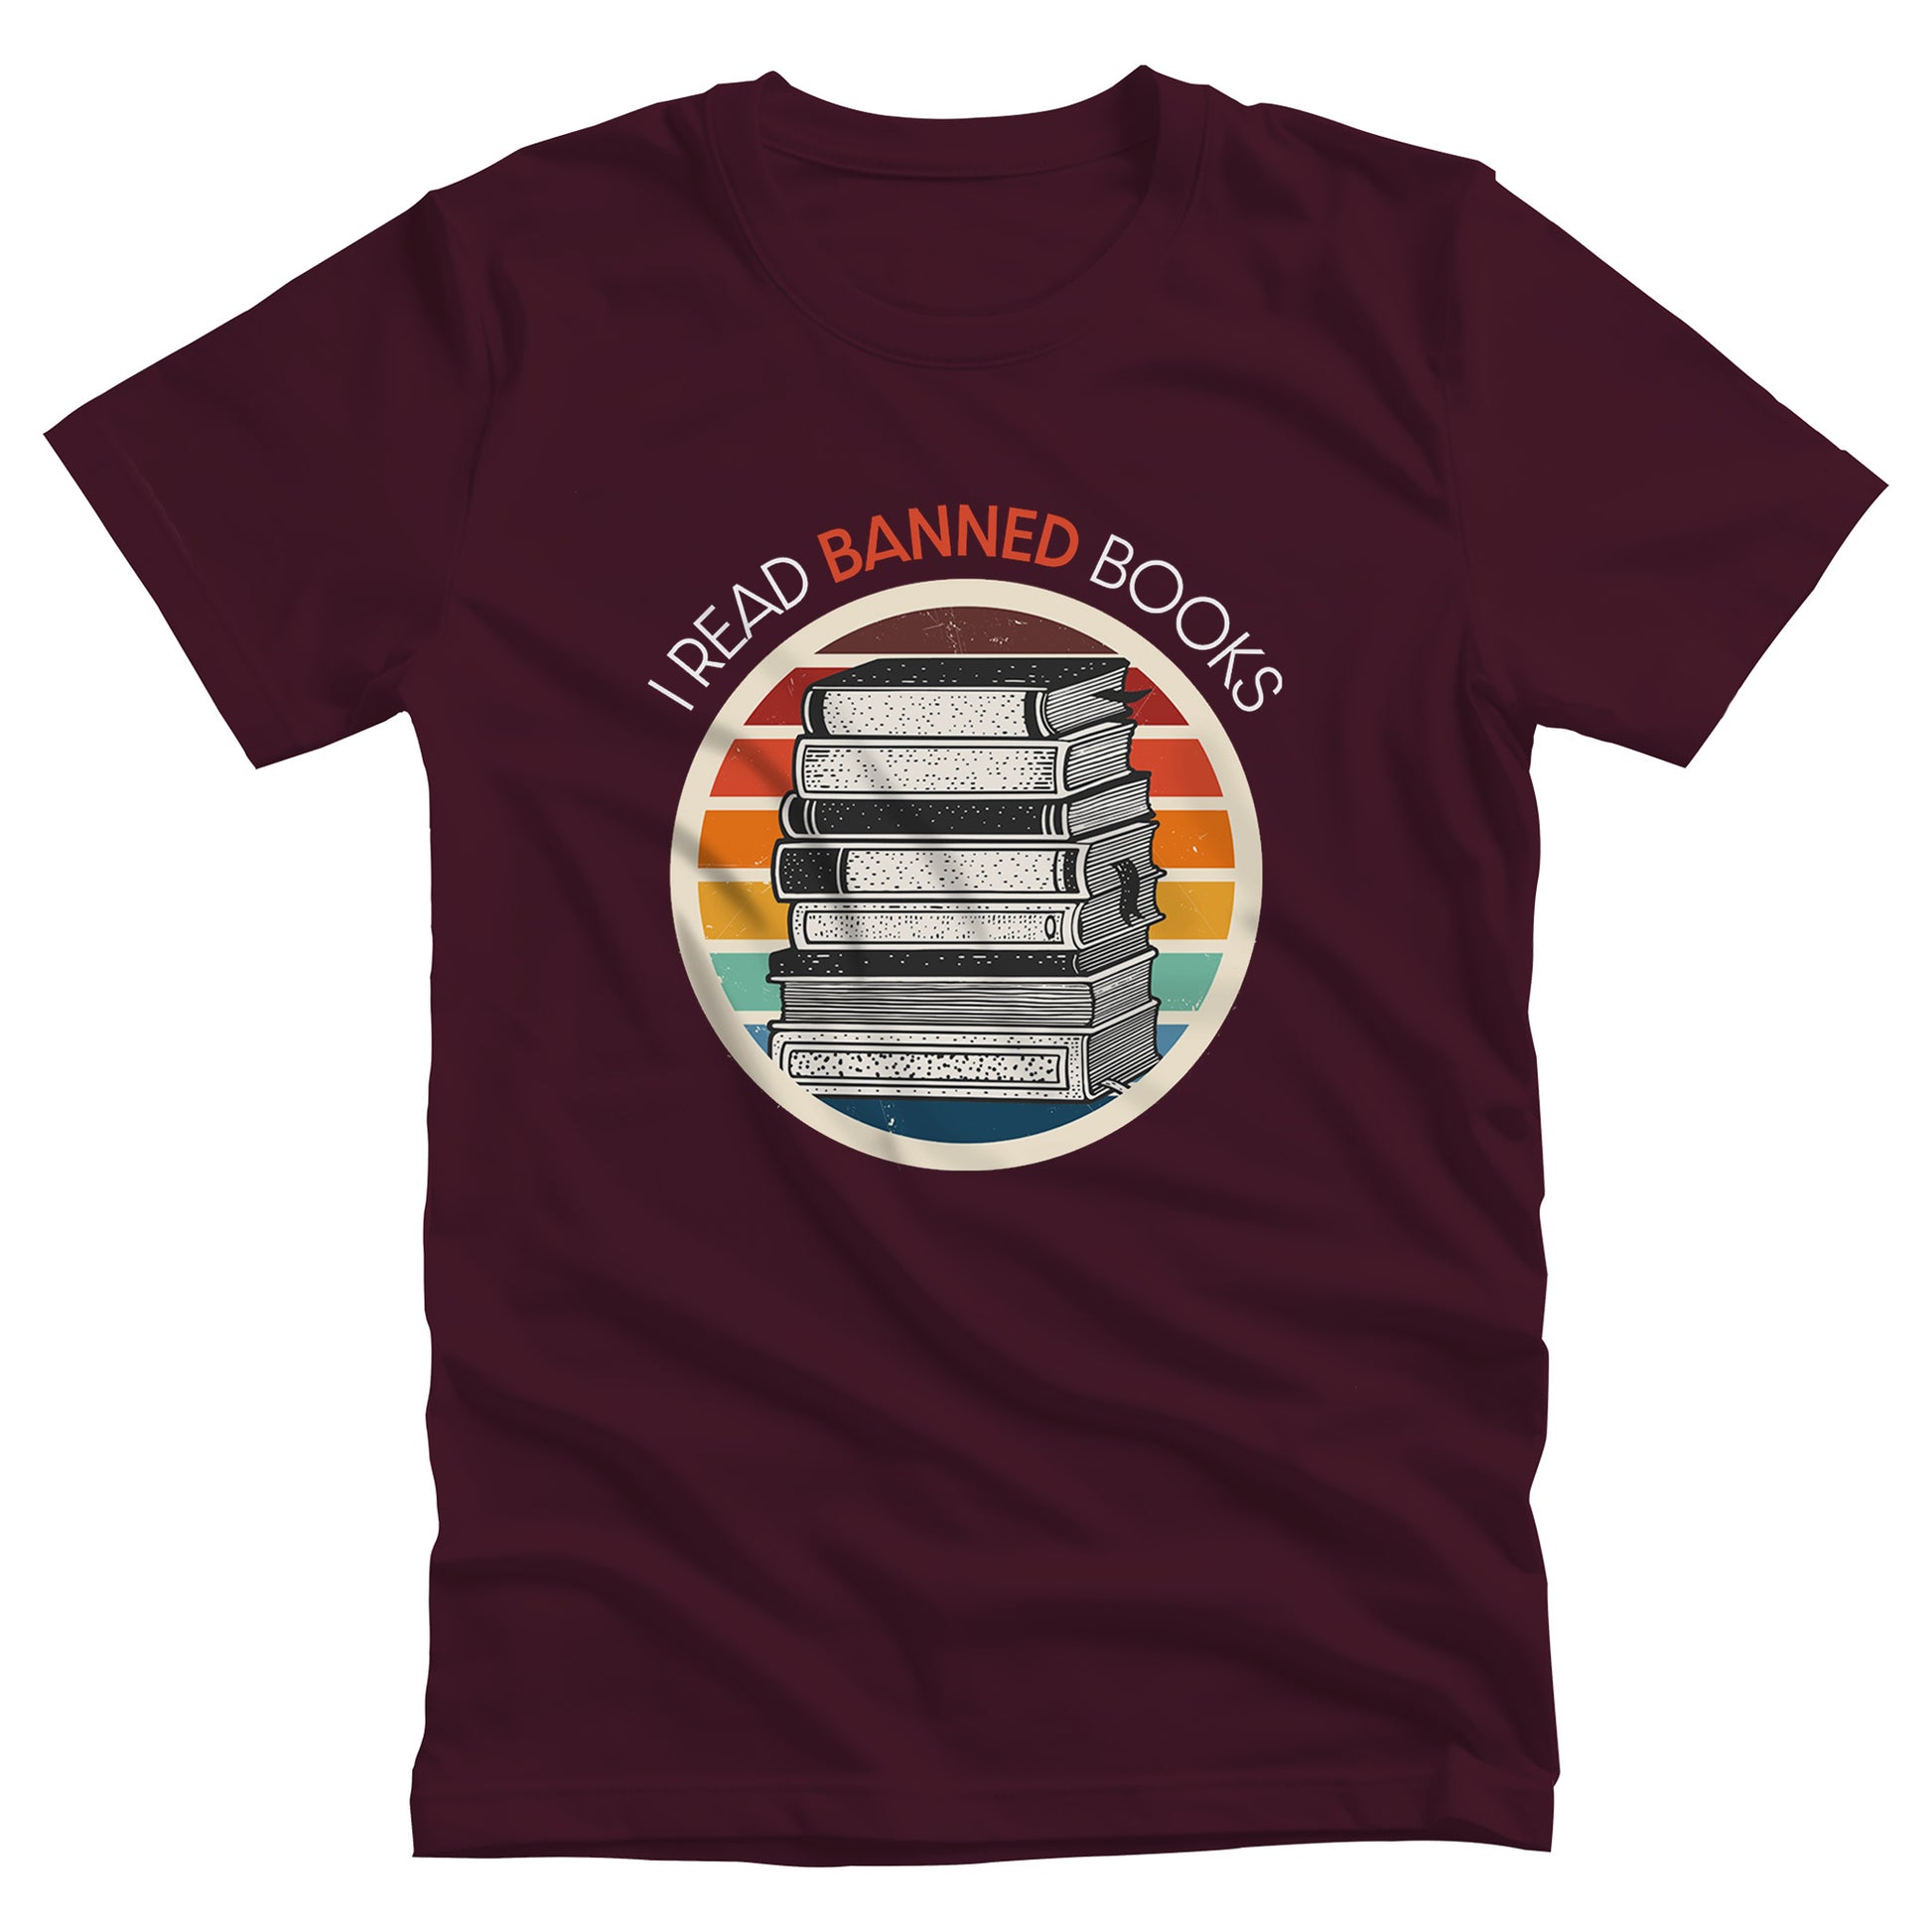 Maroon unisex t-shirt with a circular graphic of stacked old books with a vintage sunset made from horizontal lines behind it. “I READ BANNED BOOKS” is arched over the graphic with the word. “BANNED” an orange color.